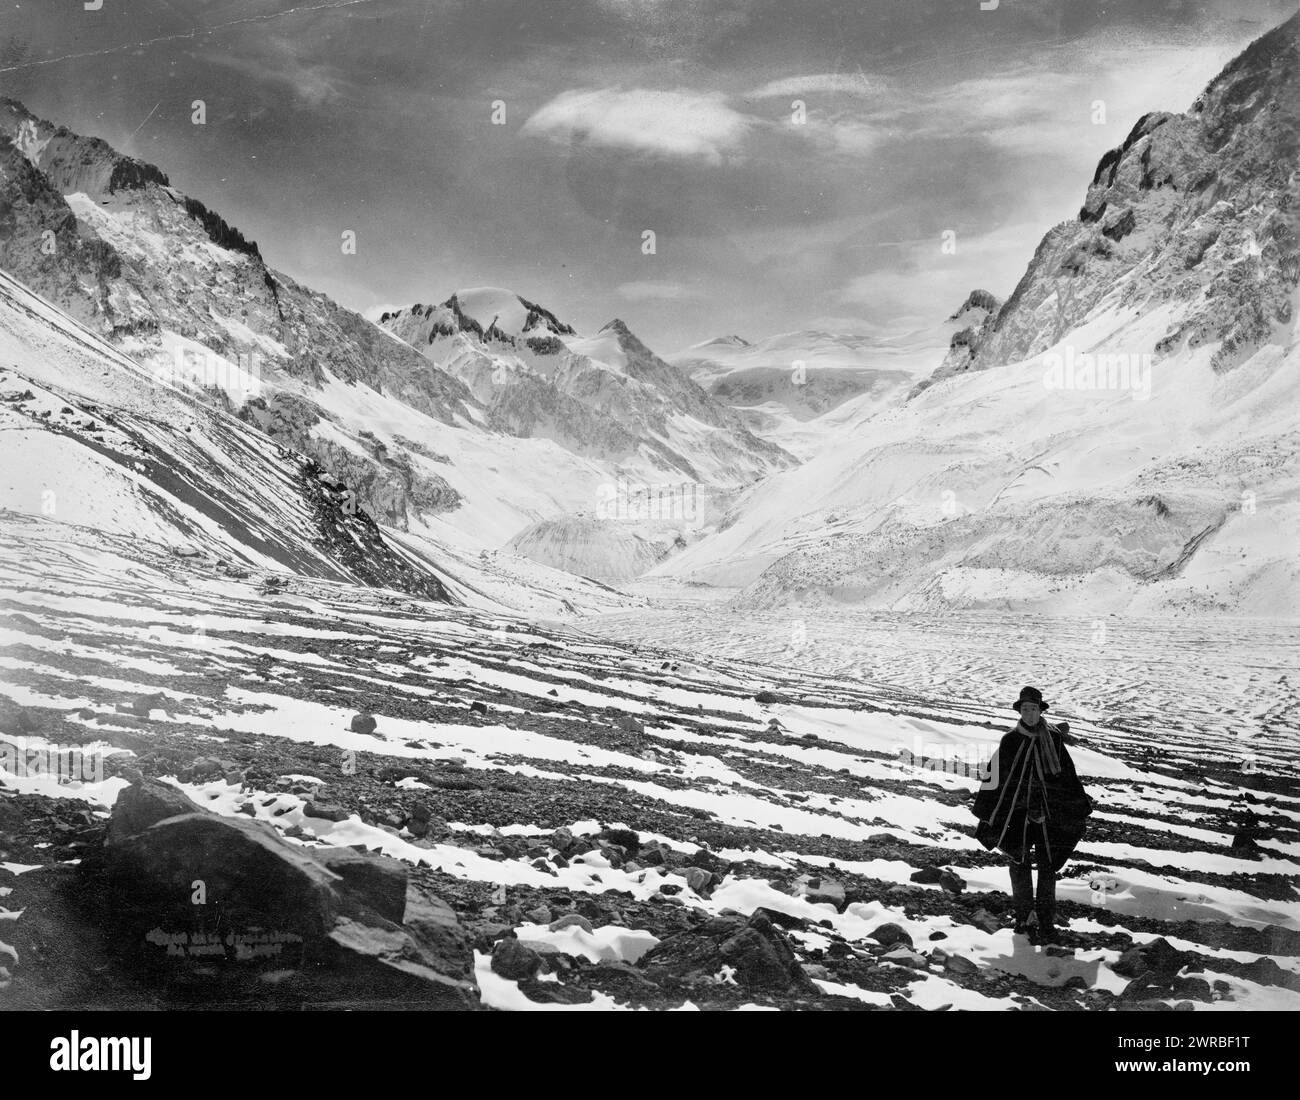 Chile - Aconcagua Valley, Photo shows a man standing in snowfields in the Aconcagua River Valley between mountains in Chile., Carpenter, Frank G. (Frank George), 1855-1924, collector, between 1890 and 1930, Valleys, Chile, Aconcagua River Valley, 1890-1930, Photographic prints, 1890-1930., Photographic prints, 1890-1930, 1 photographic print Stock Photo